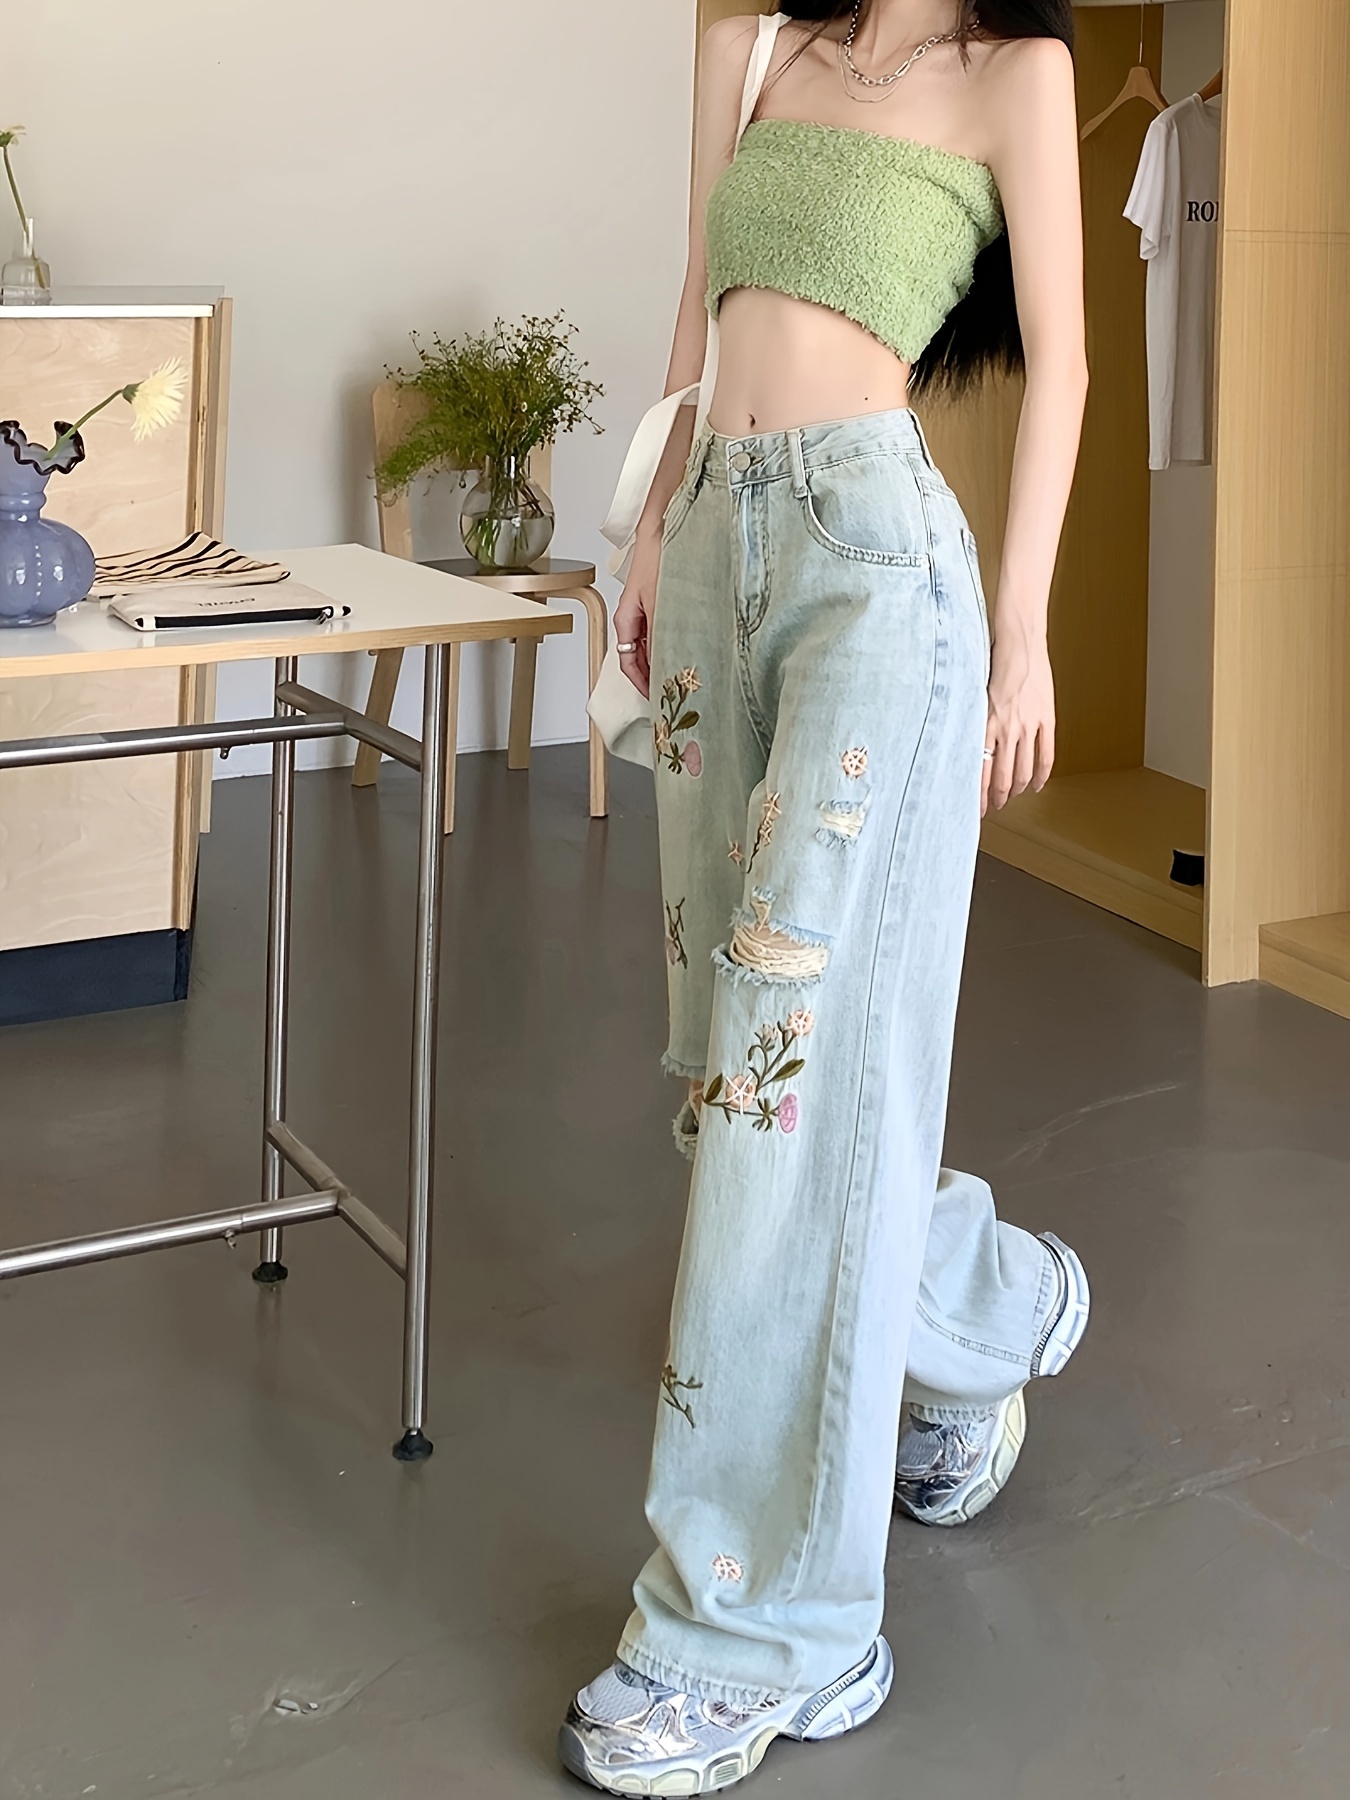 Women Cotton Pants Floral Embroidery Loose Baggy Elastic Waist Trousers Cute